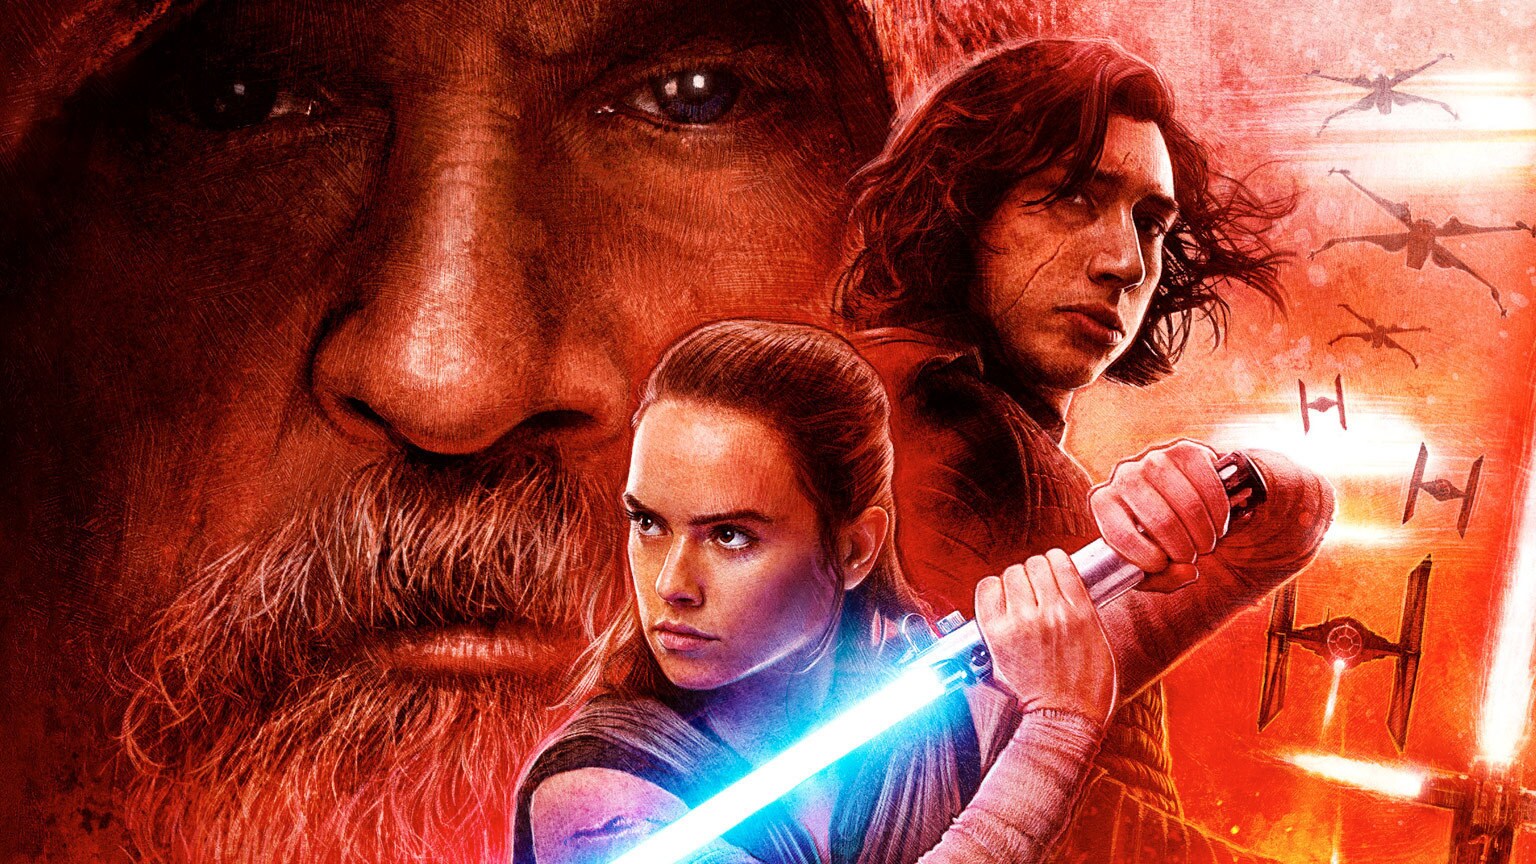 Artist Paul Shipper on His Stunning Star Wars: The Last Jedi Theatrical Poster